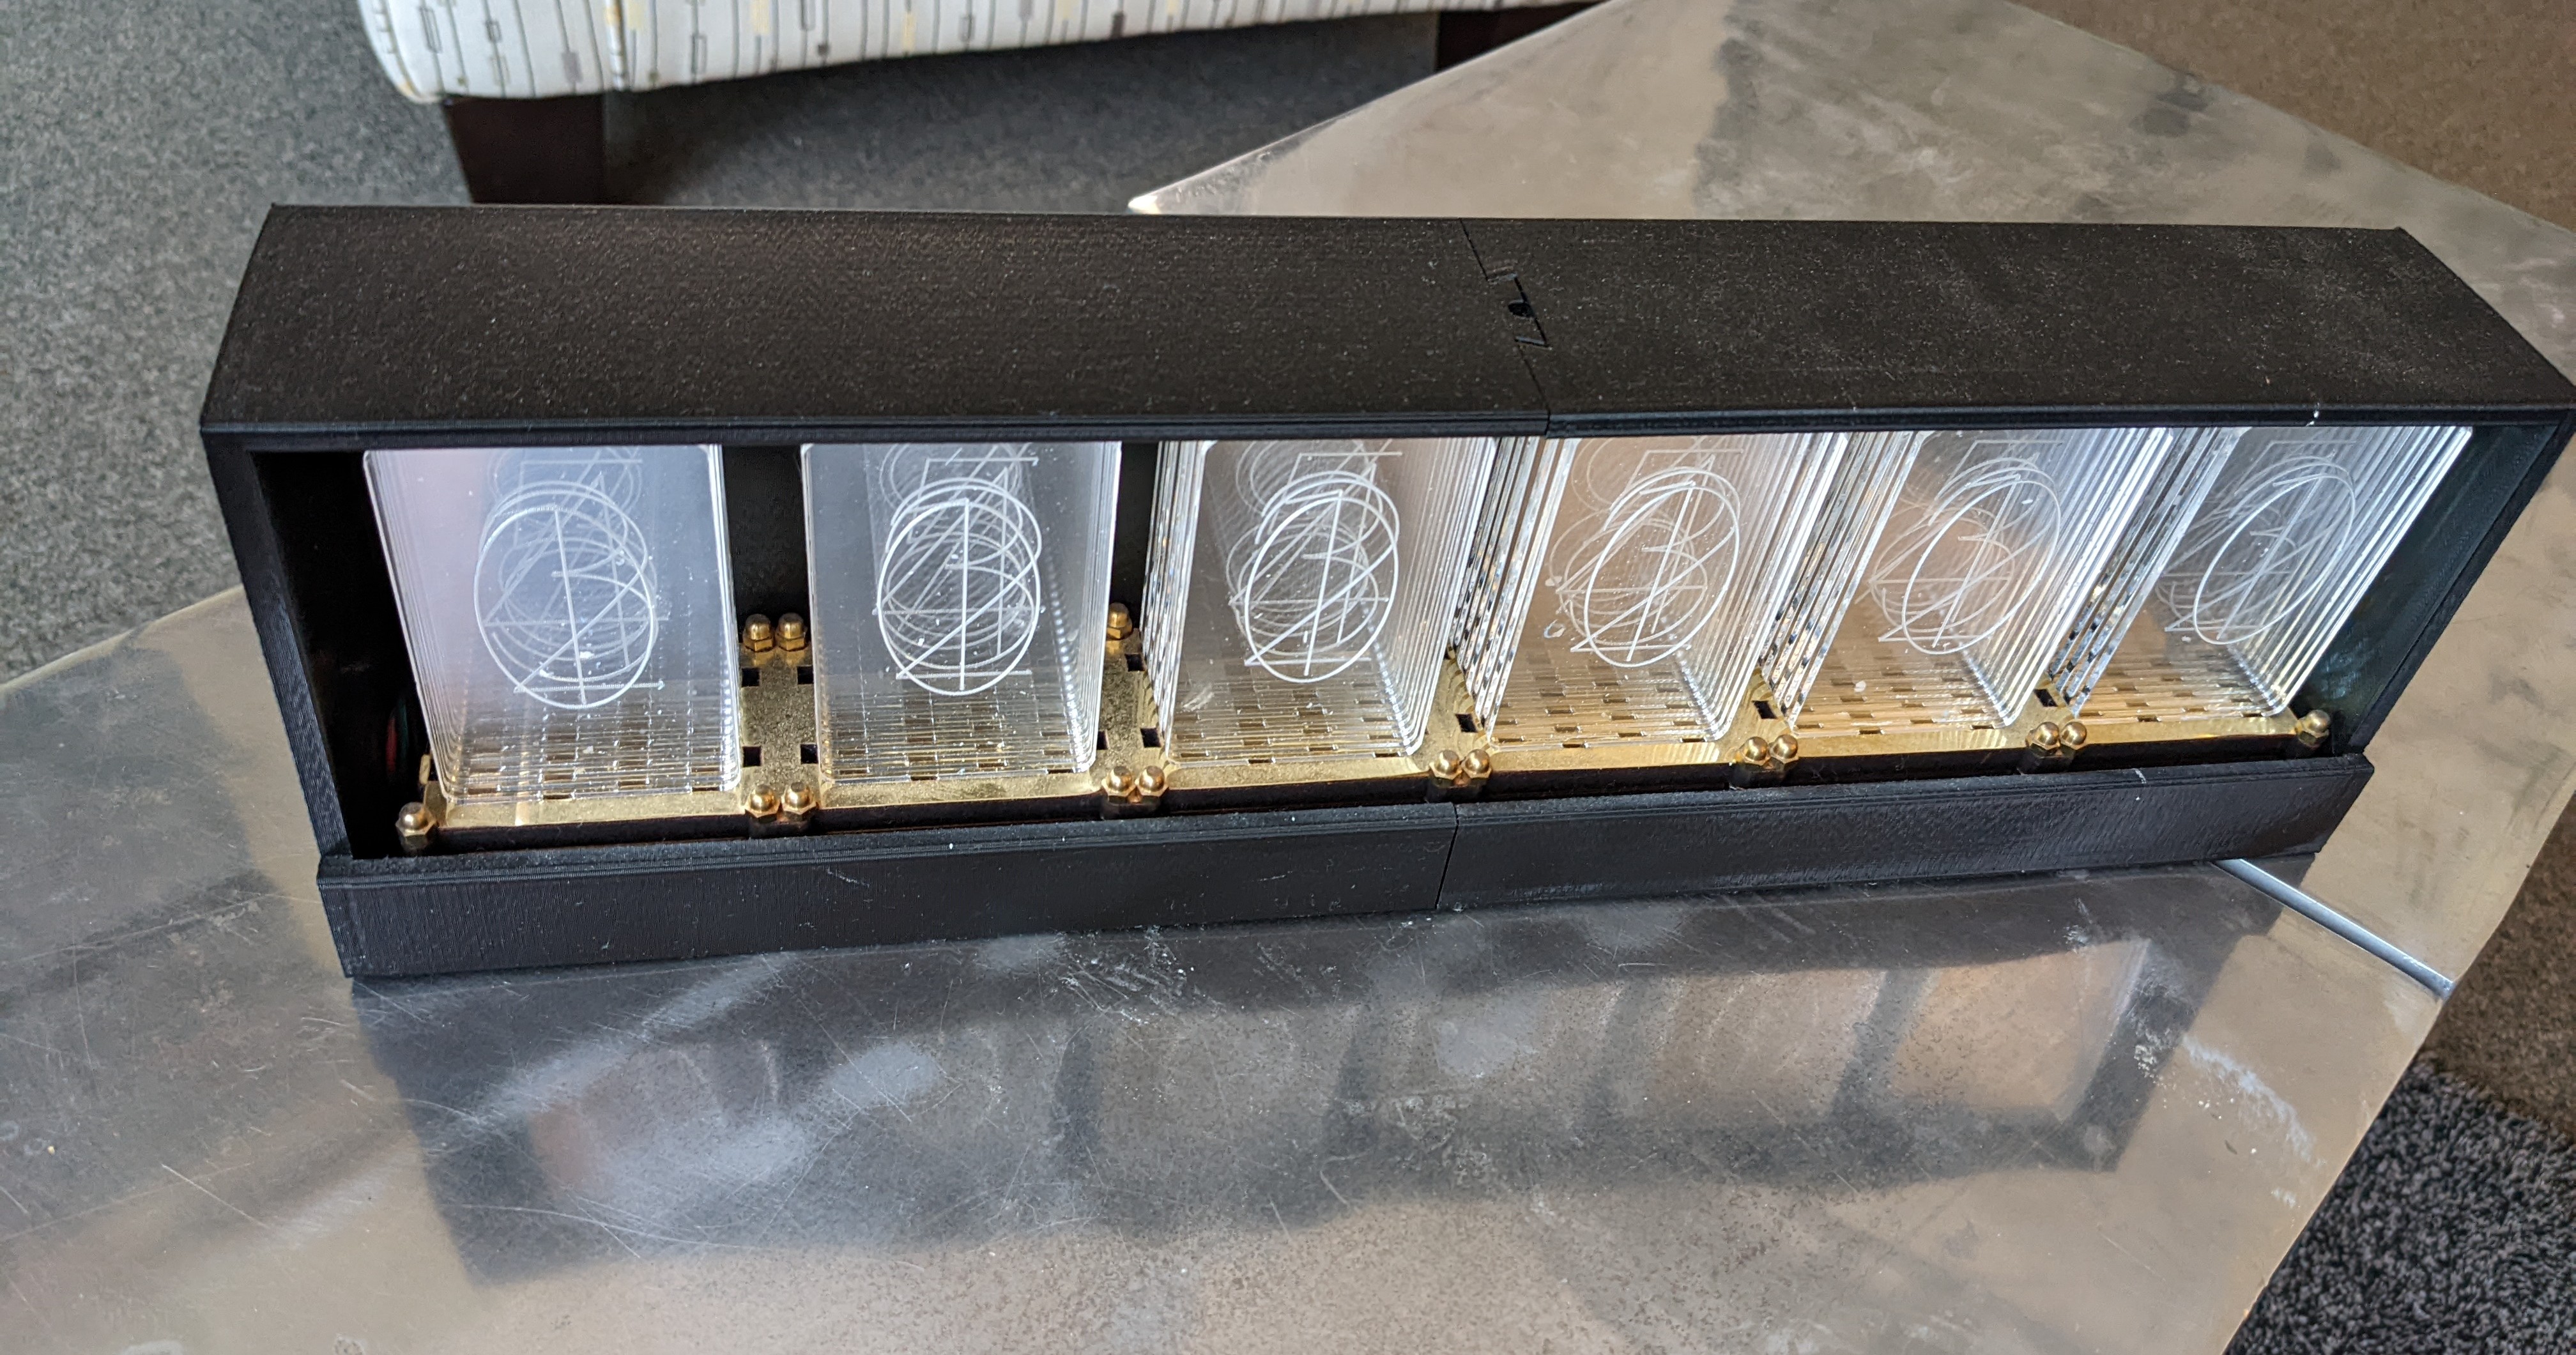 LED-NIXIE-M clock box in two parts